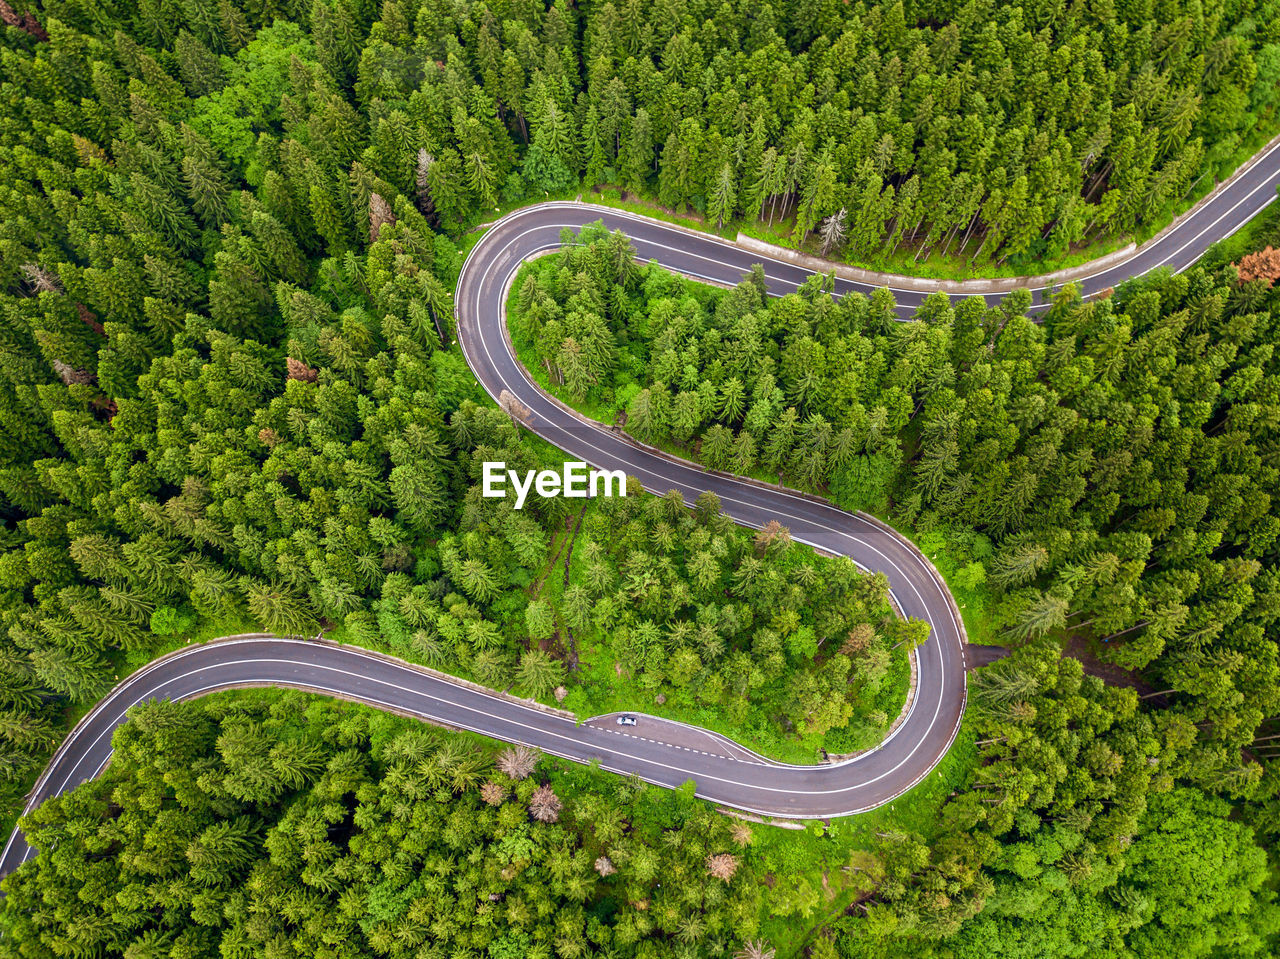 green, plant, road, tree, aerial view, environment, curve, landscape, transportation, no people, land, nature, growth, forest, high angle view, beauty in nature, scenics - nature, aerial photography, winding road, foliage, non-urban scene, day, lush foliage, tranquility, outdoors, rural scene, field, tranquil scene, travel, mode of transportation, highway